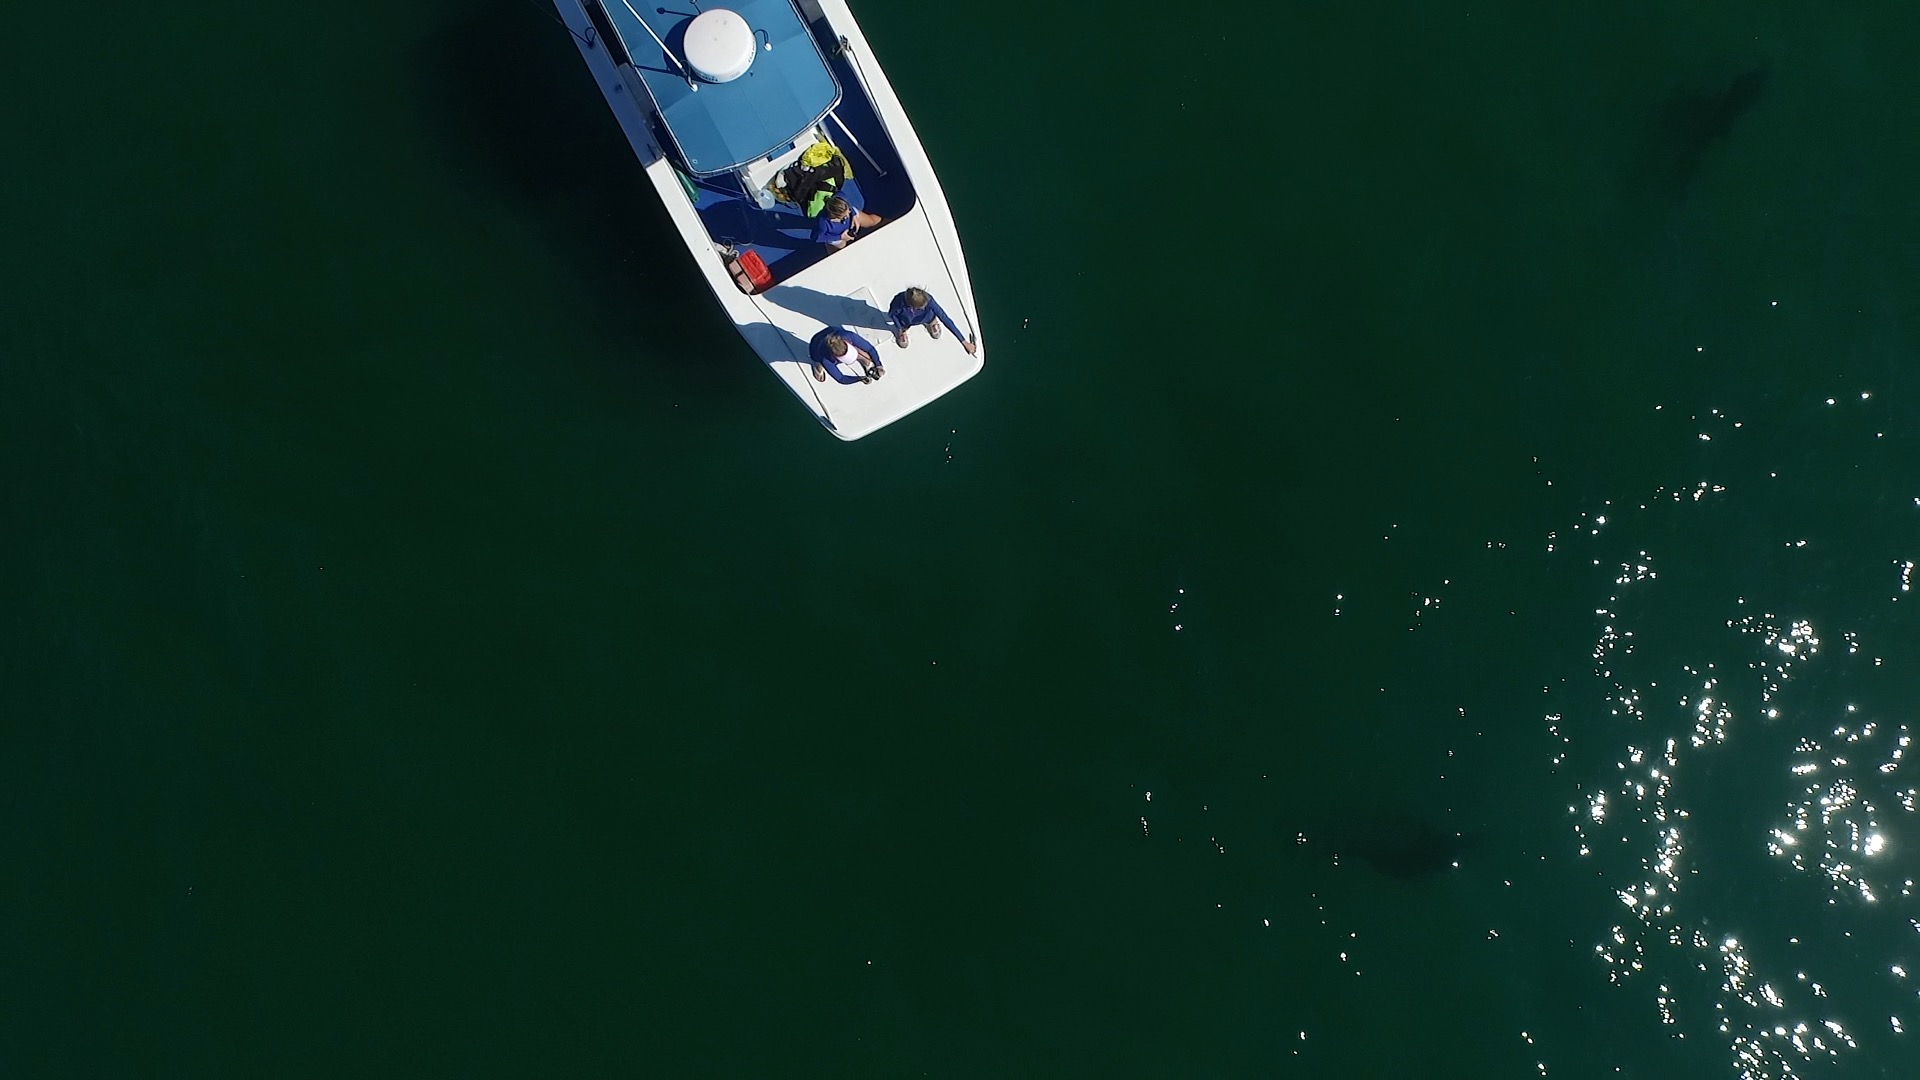 Students on boat observe white sharks in coastal waters.